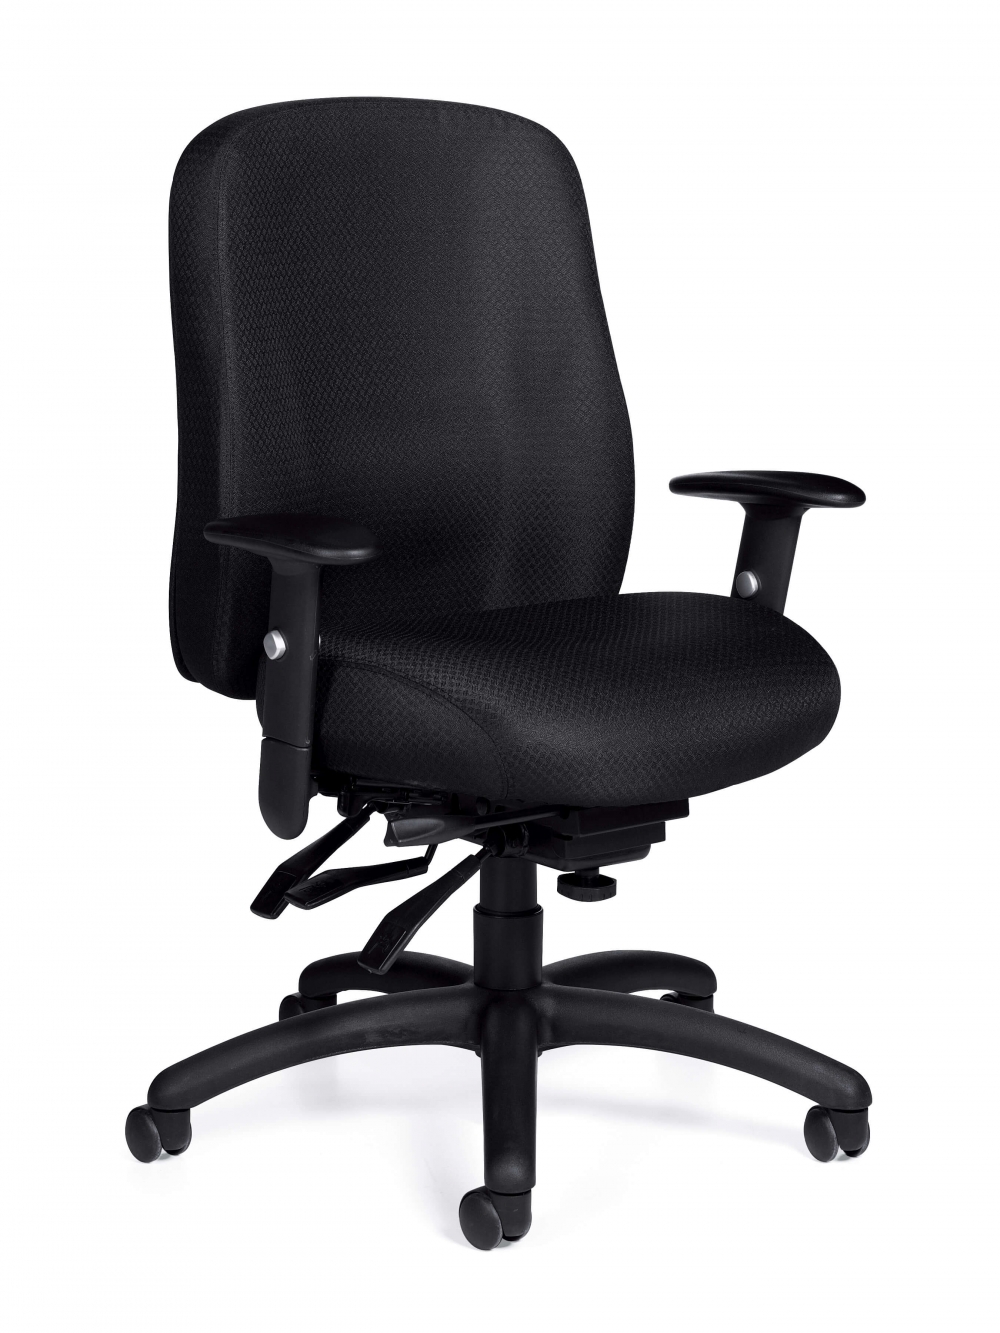 Office furniture chairs upholstered desk chair